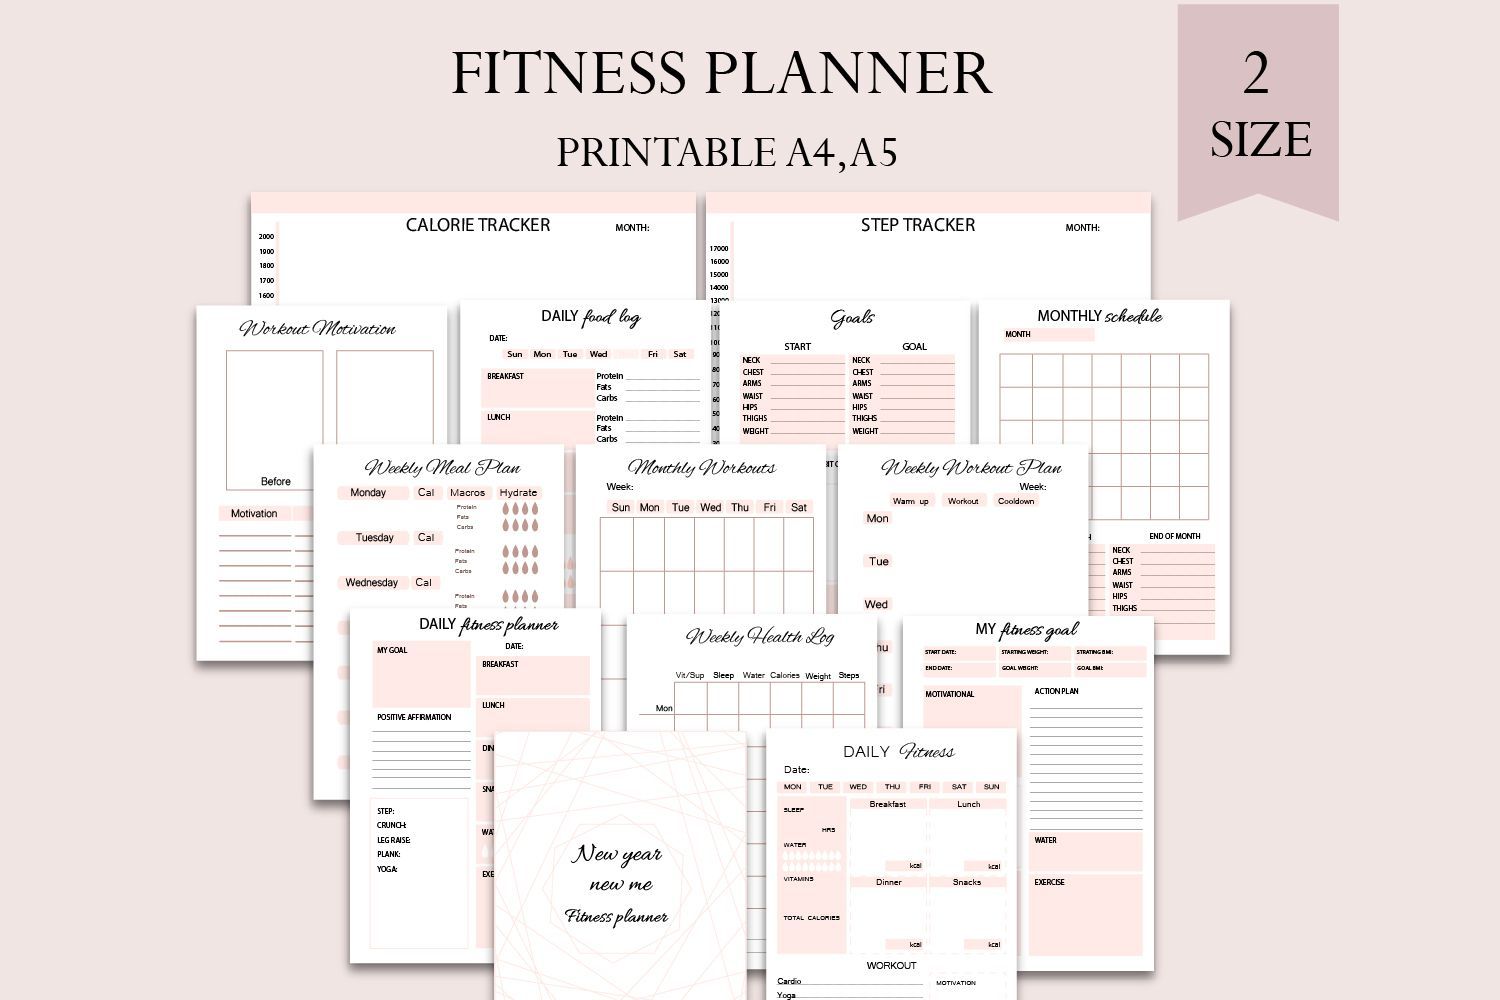 12 fitness Planner download ideas